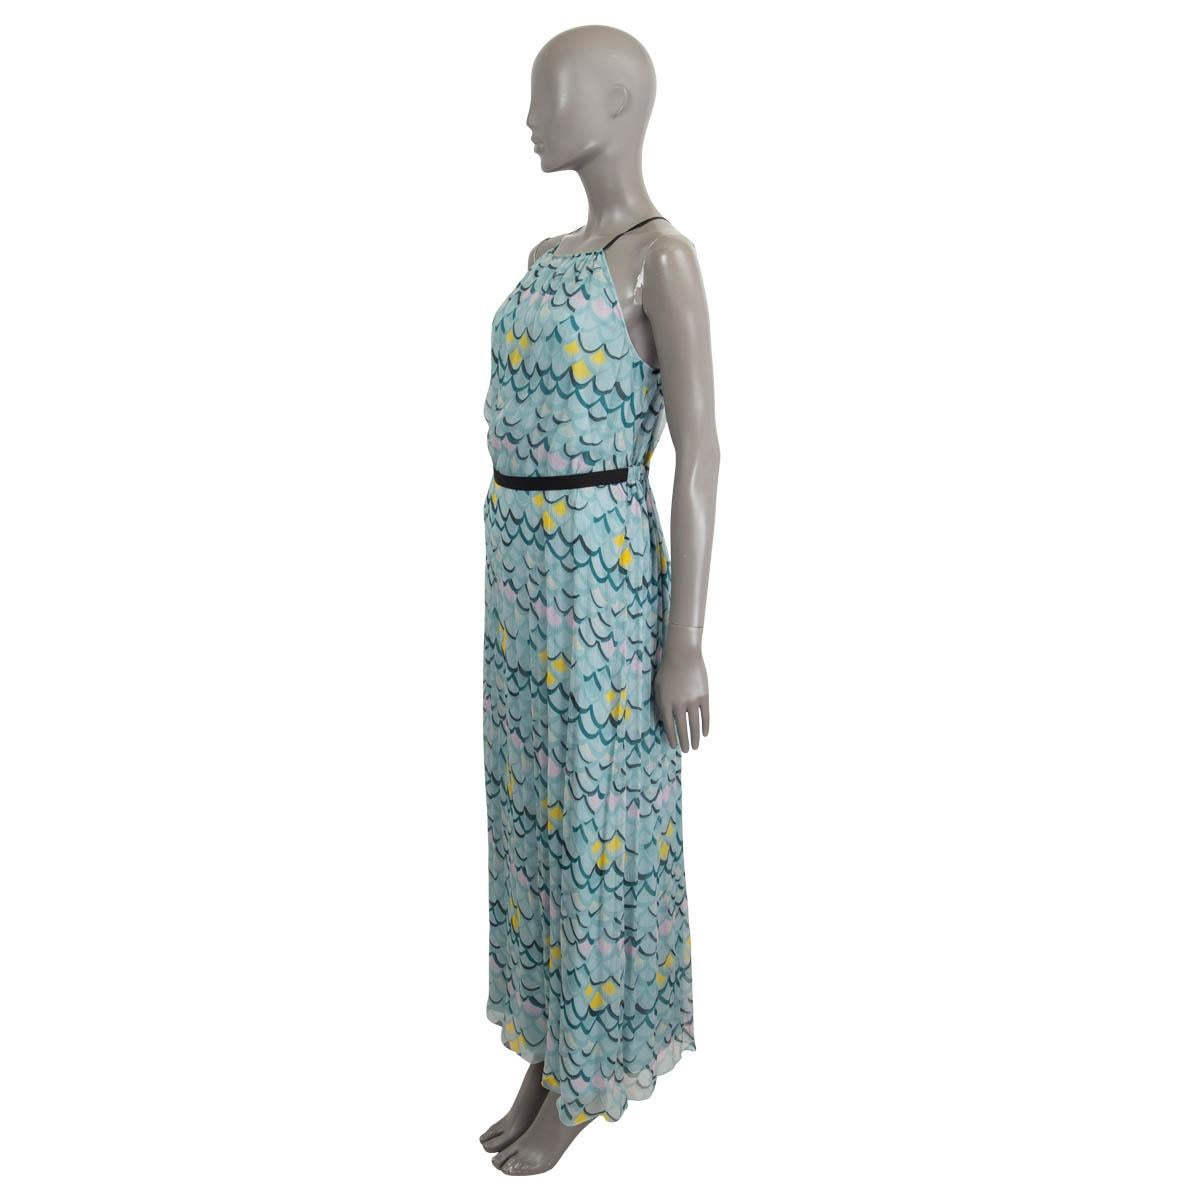 100% authentic M Missoni sleeveless maxi dress in pale turquoise, petrol, black, baby pink and yellow scale printed silk (100%).  The design features an open back with a necktie and a black elastic waist belt. Lined in pale turquoise silk (100%).